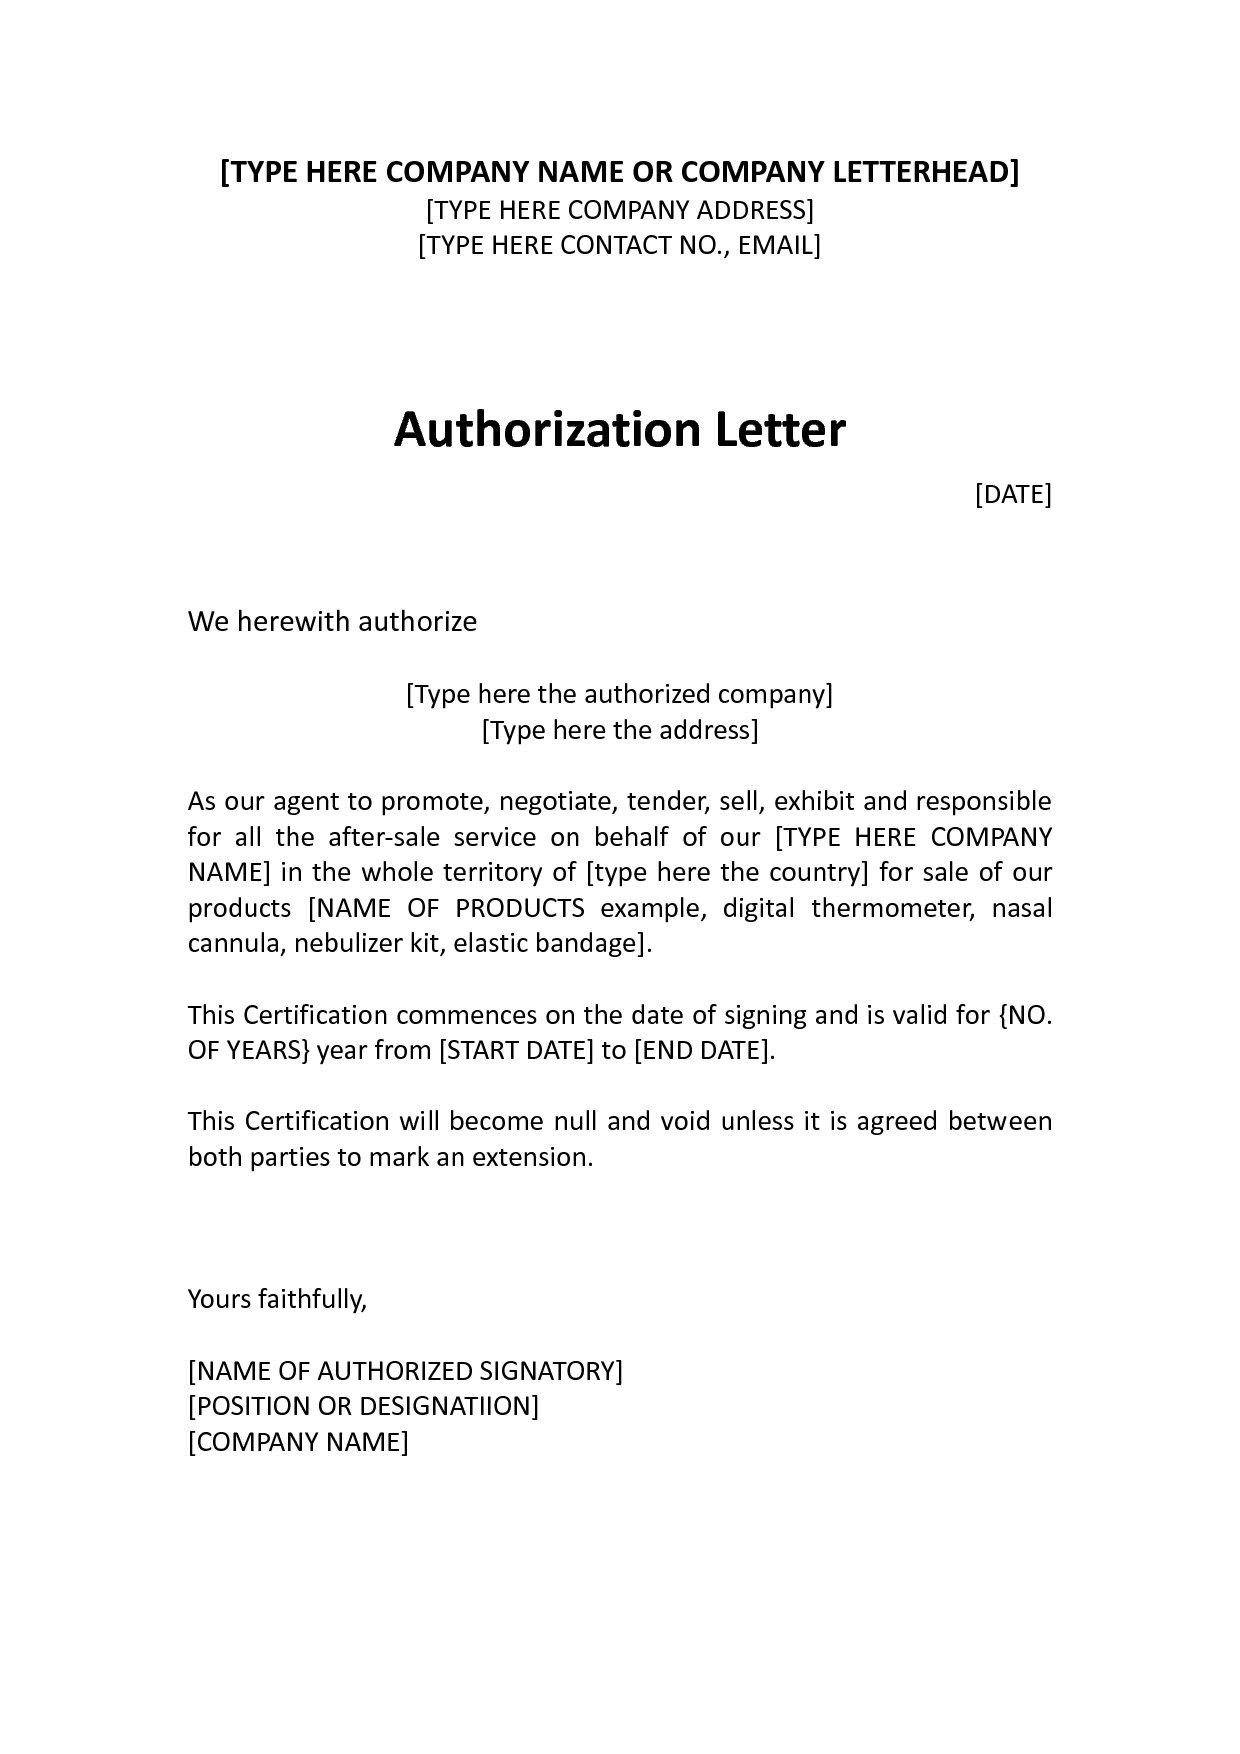 Proof Of Employment Letter Template Word - Authorization Distributor Letter Sample Distributor Dealer